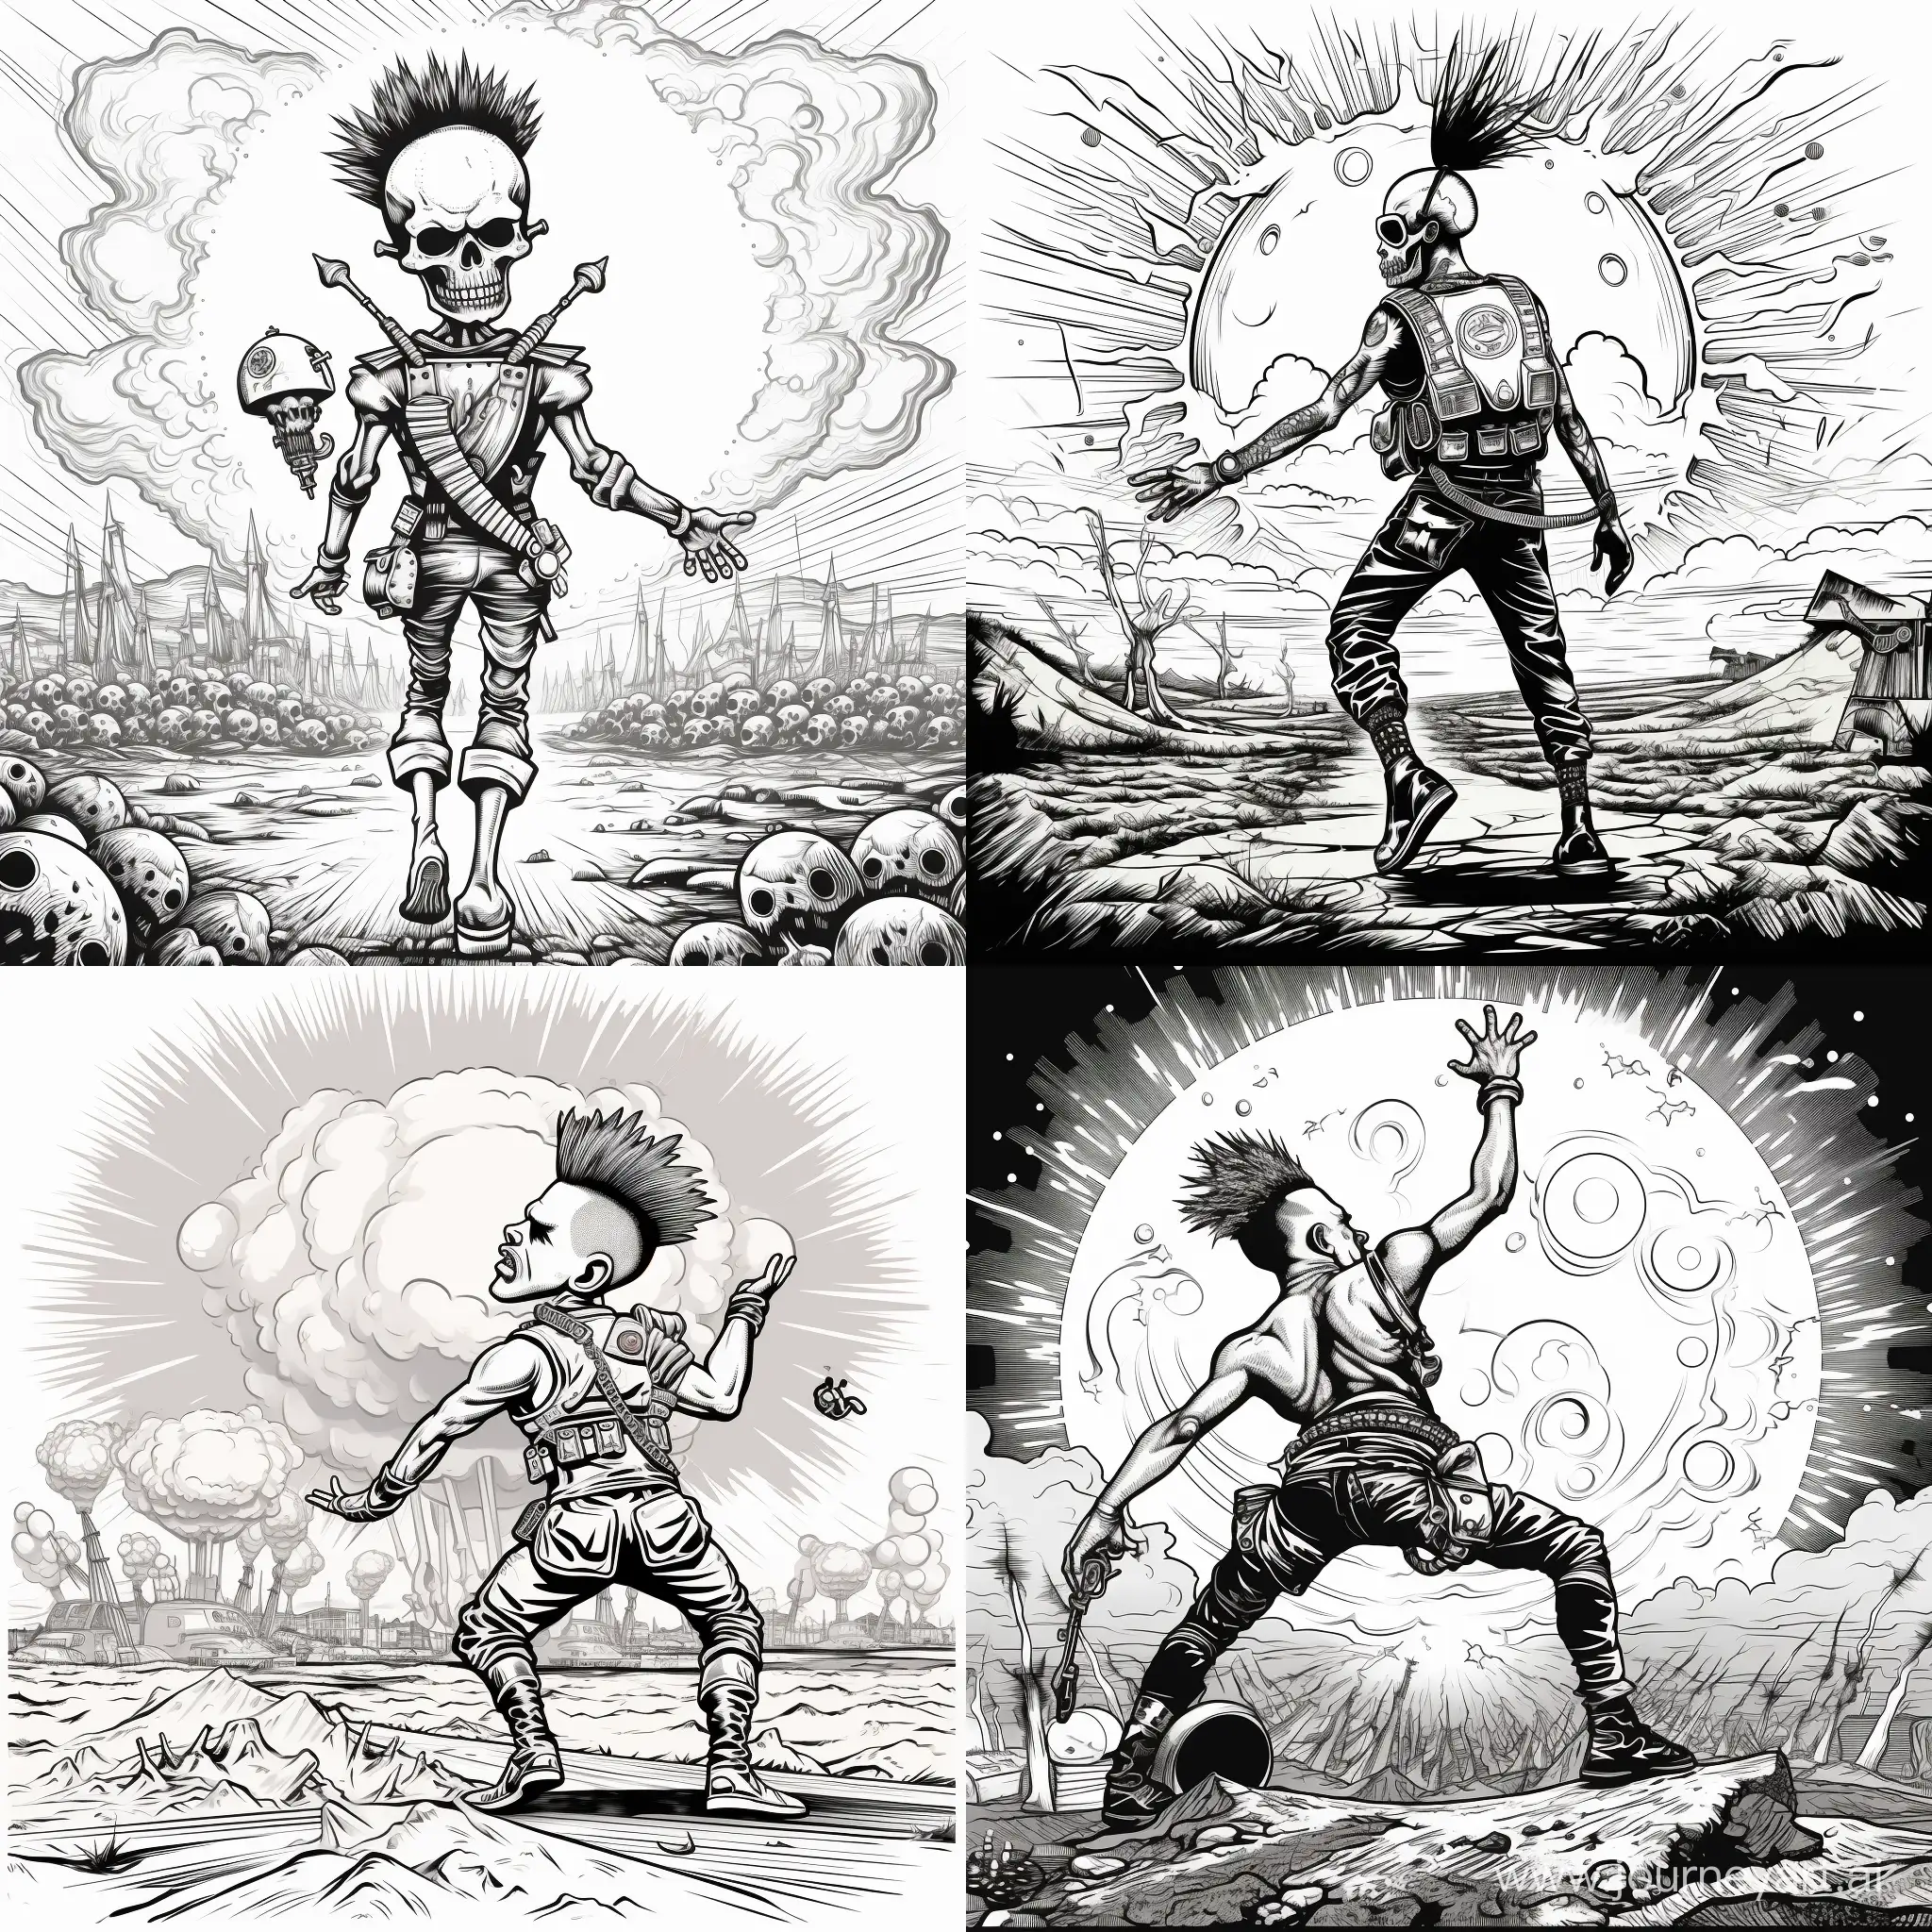 punk man with a mohawk dancing in a battlefield, wearing traditional punk outfit, with mushroom cloud on the horizon, black and white line art style